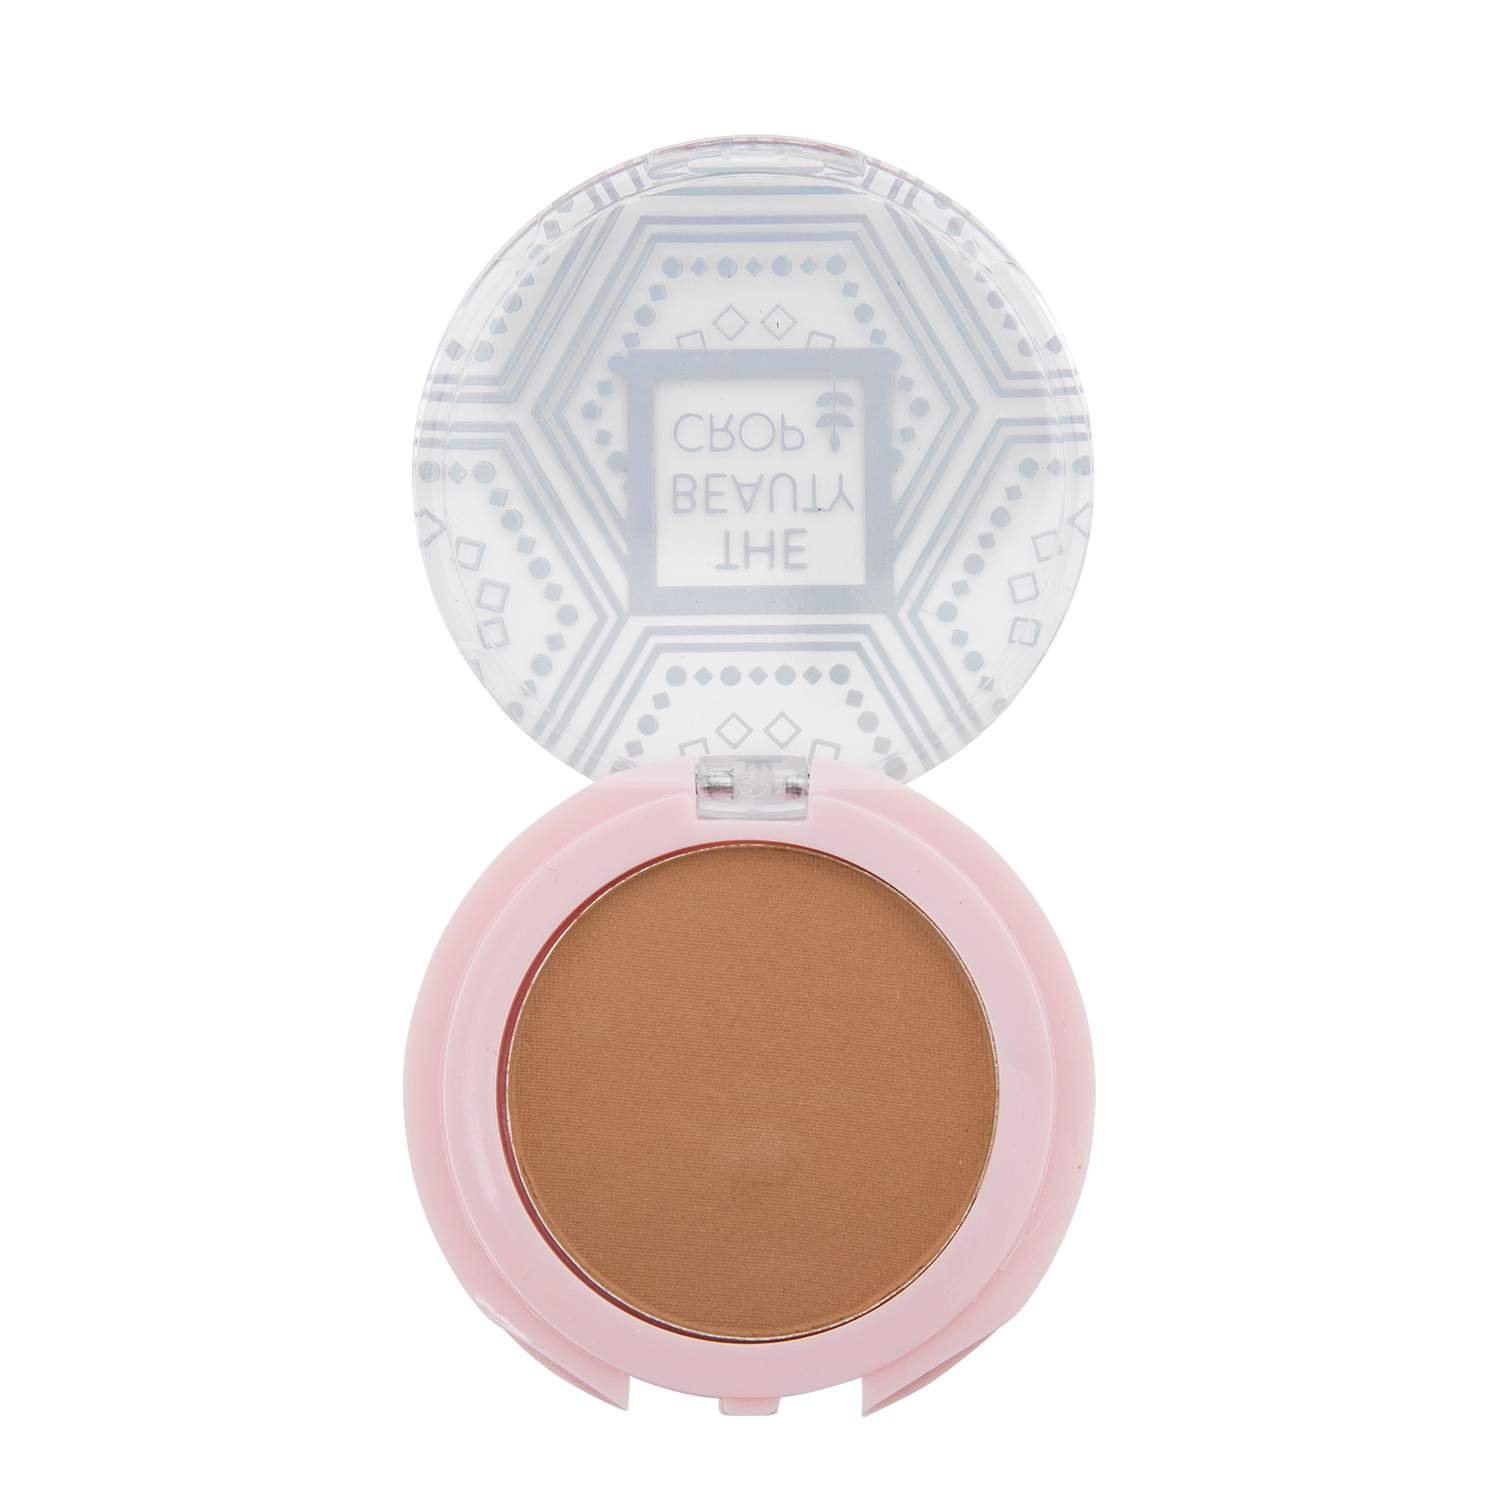 The Beauty Crop "You Go Girl” Bronzer Compact The Beauty Crop "You Go Girl” Bronzer Compact - Sardinia Sand 1